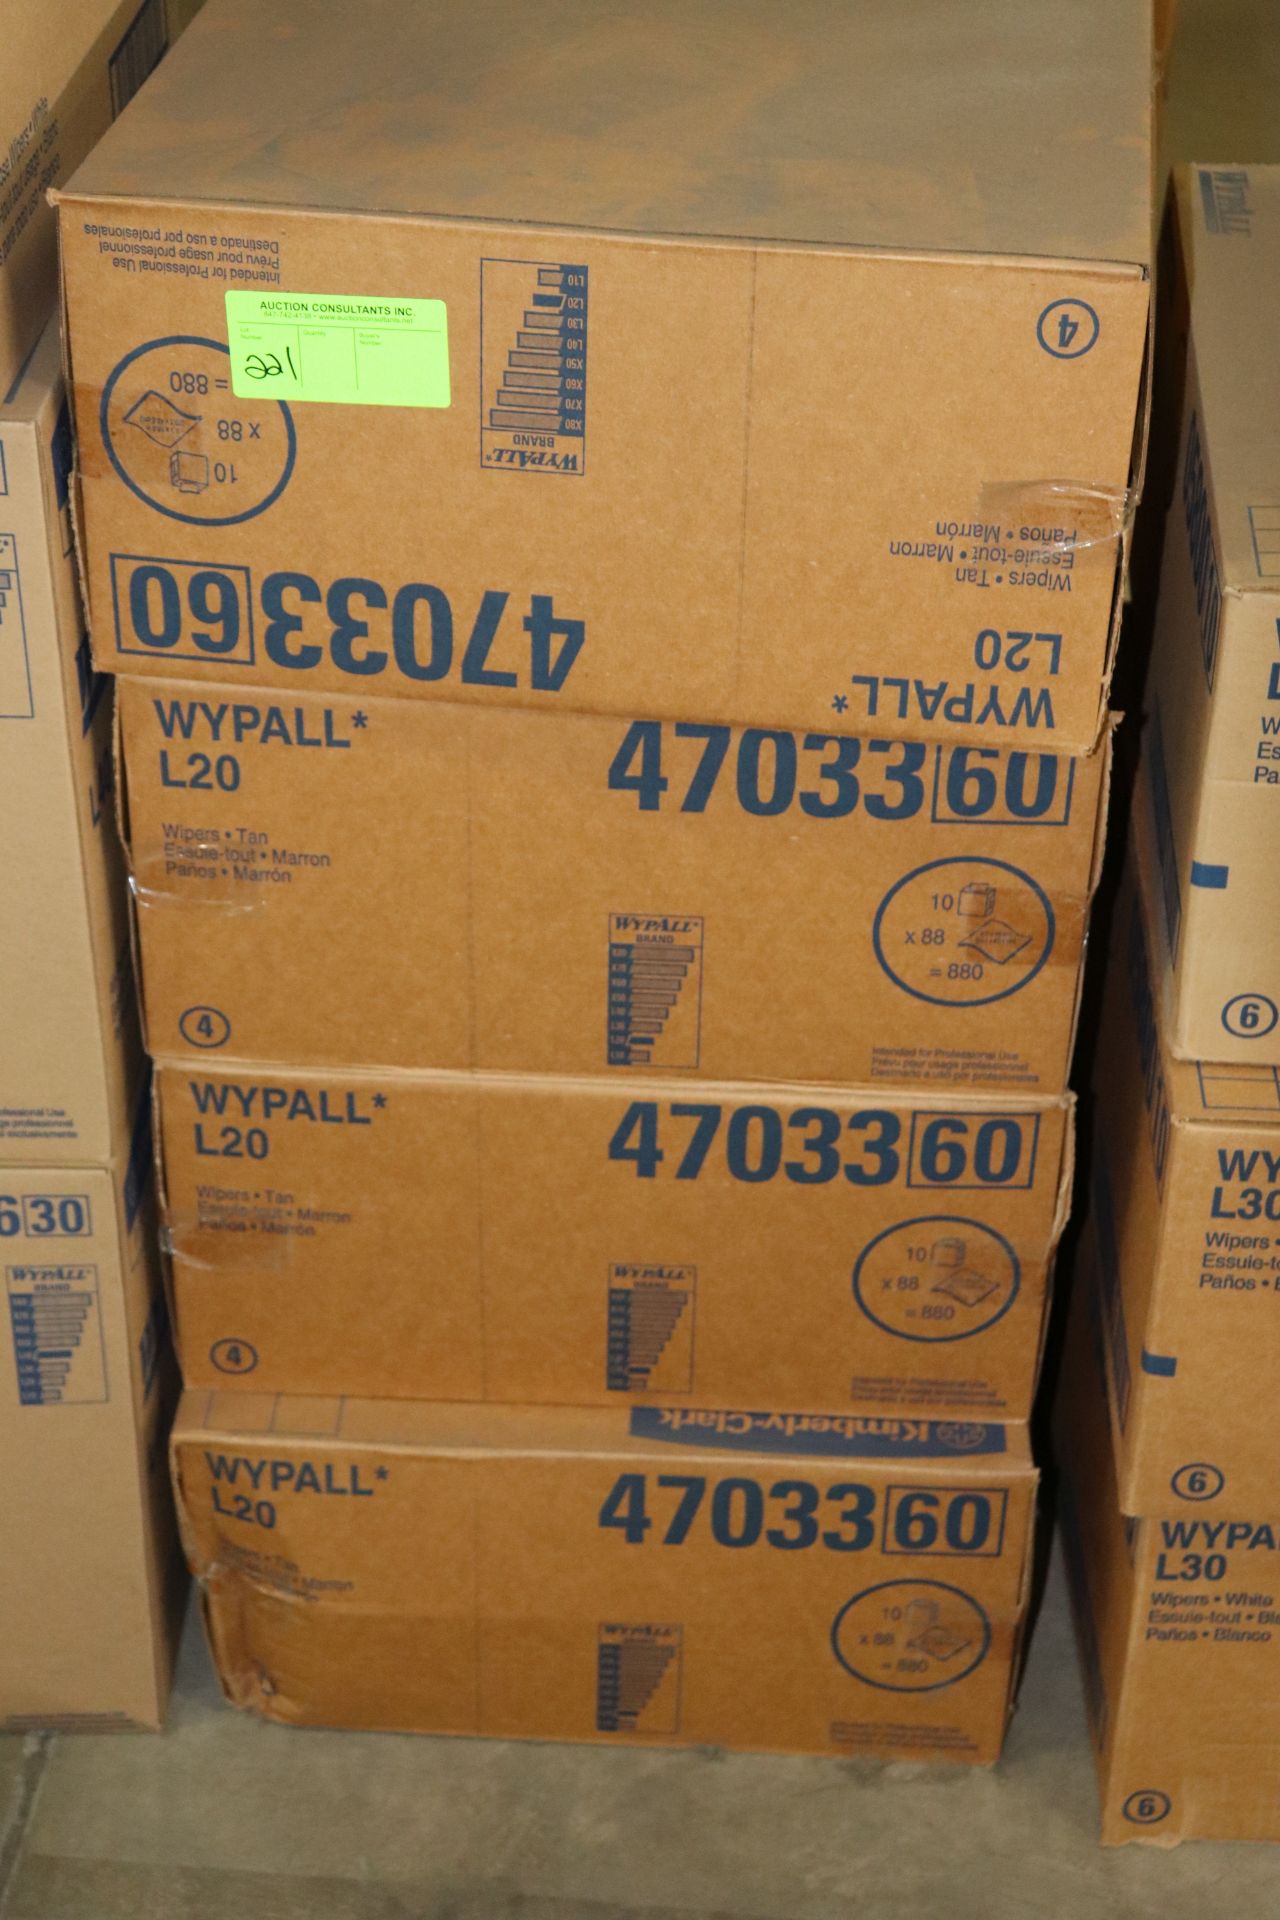 Group of four boxes of Wypall L20 wipers, tan, ten per box